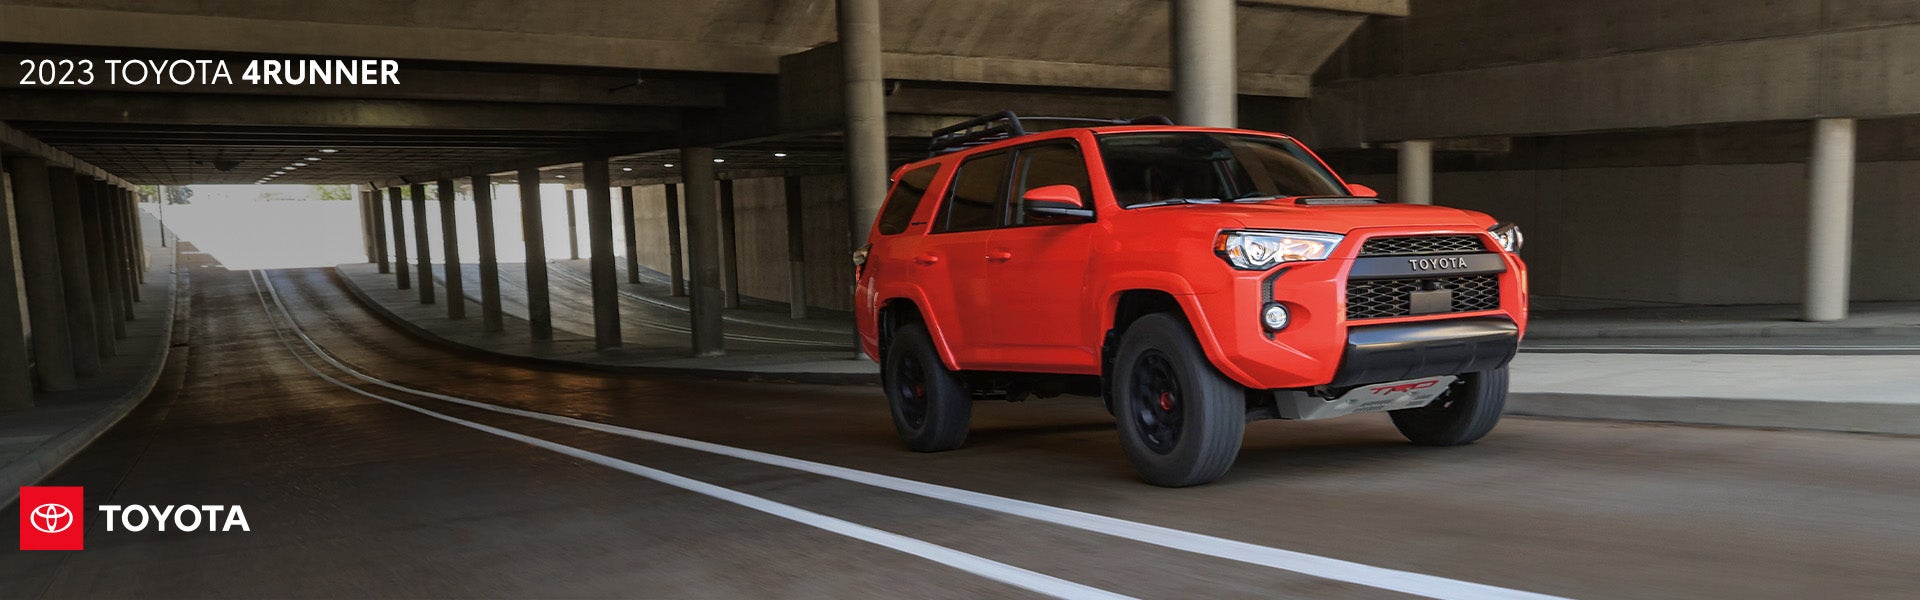 2023 Toyota 4Runner at Toyota World of Clinton